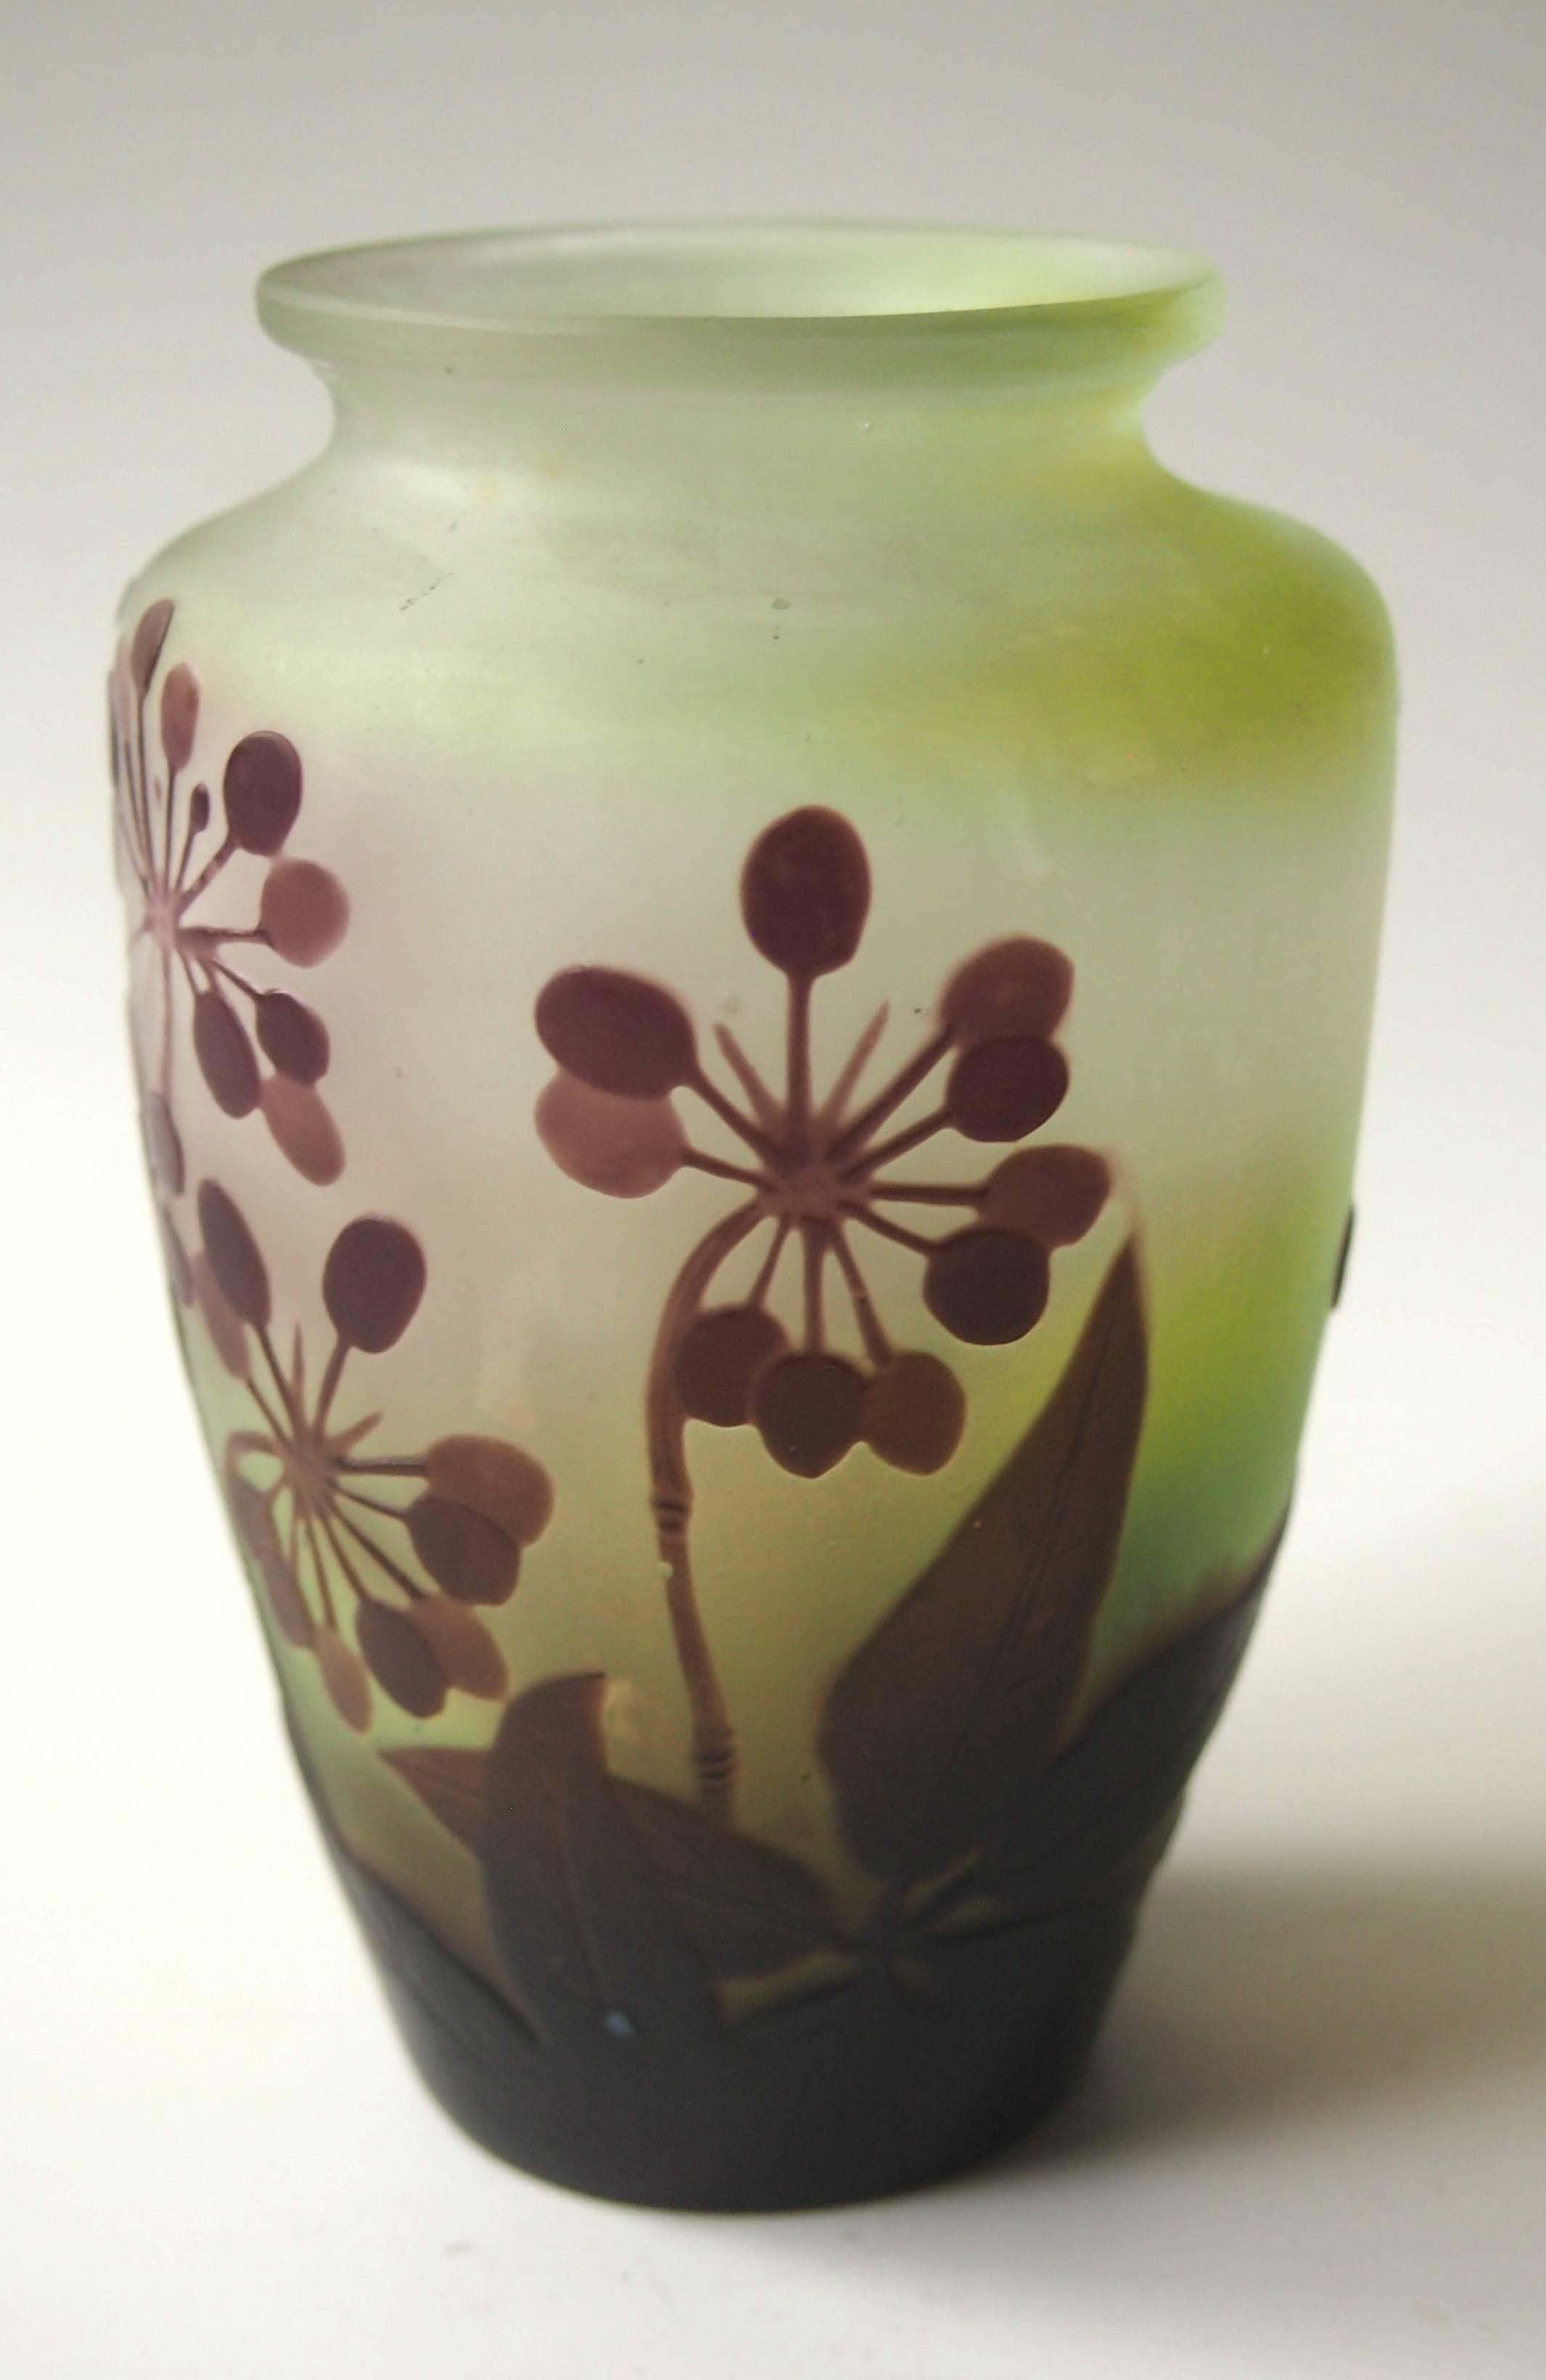 Fine Art Nouveau signed Emile Galle cameo vase in greens and purples, depicting the D'Ombelles plant -a Classic French design.

Emile Galle was probably the greatest glass maker of all time and one of the founding fathers of the Art Nouveau